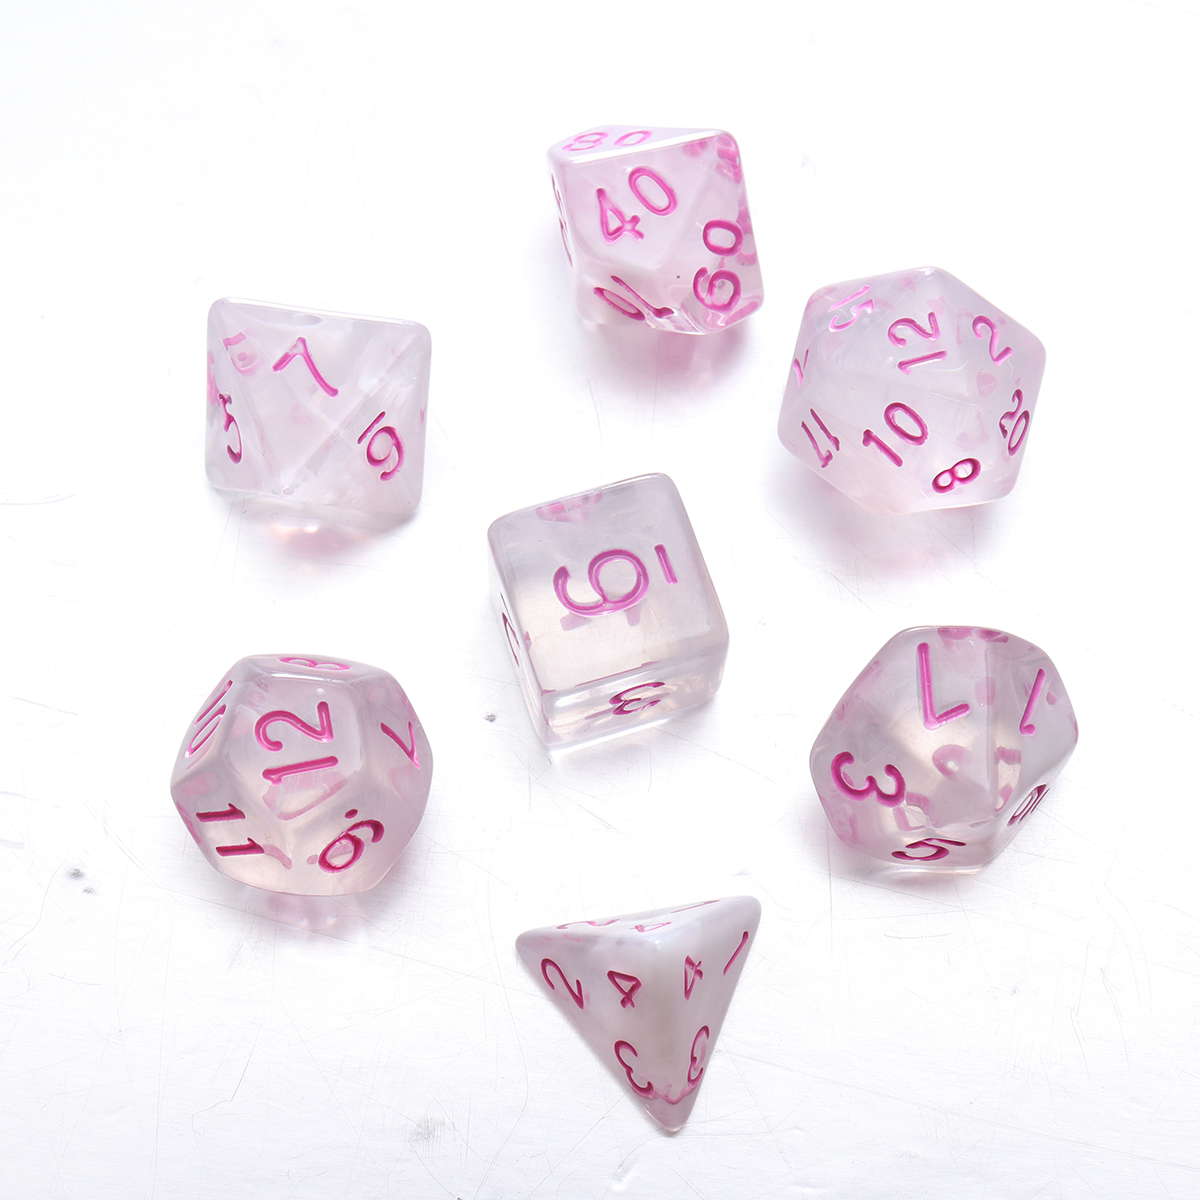 7pcs-Set-Embossed-Polyhedral-Dices-DND-RPG-MTG-Role-Playing-Board-Game-Dices-Set-1627969-3